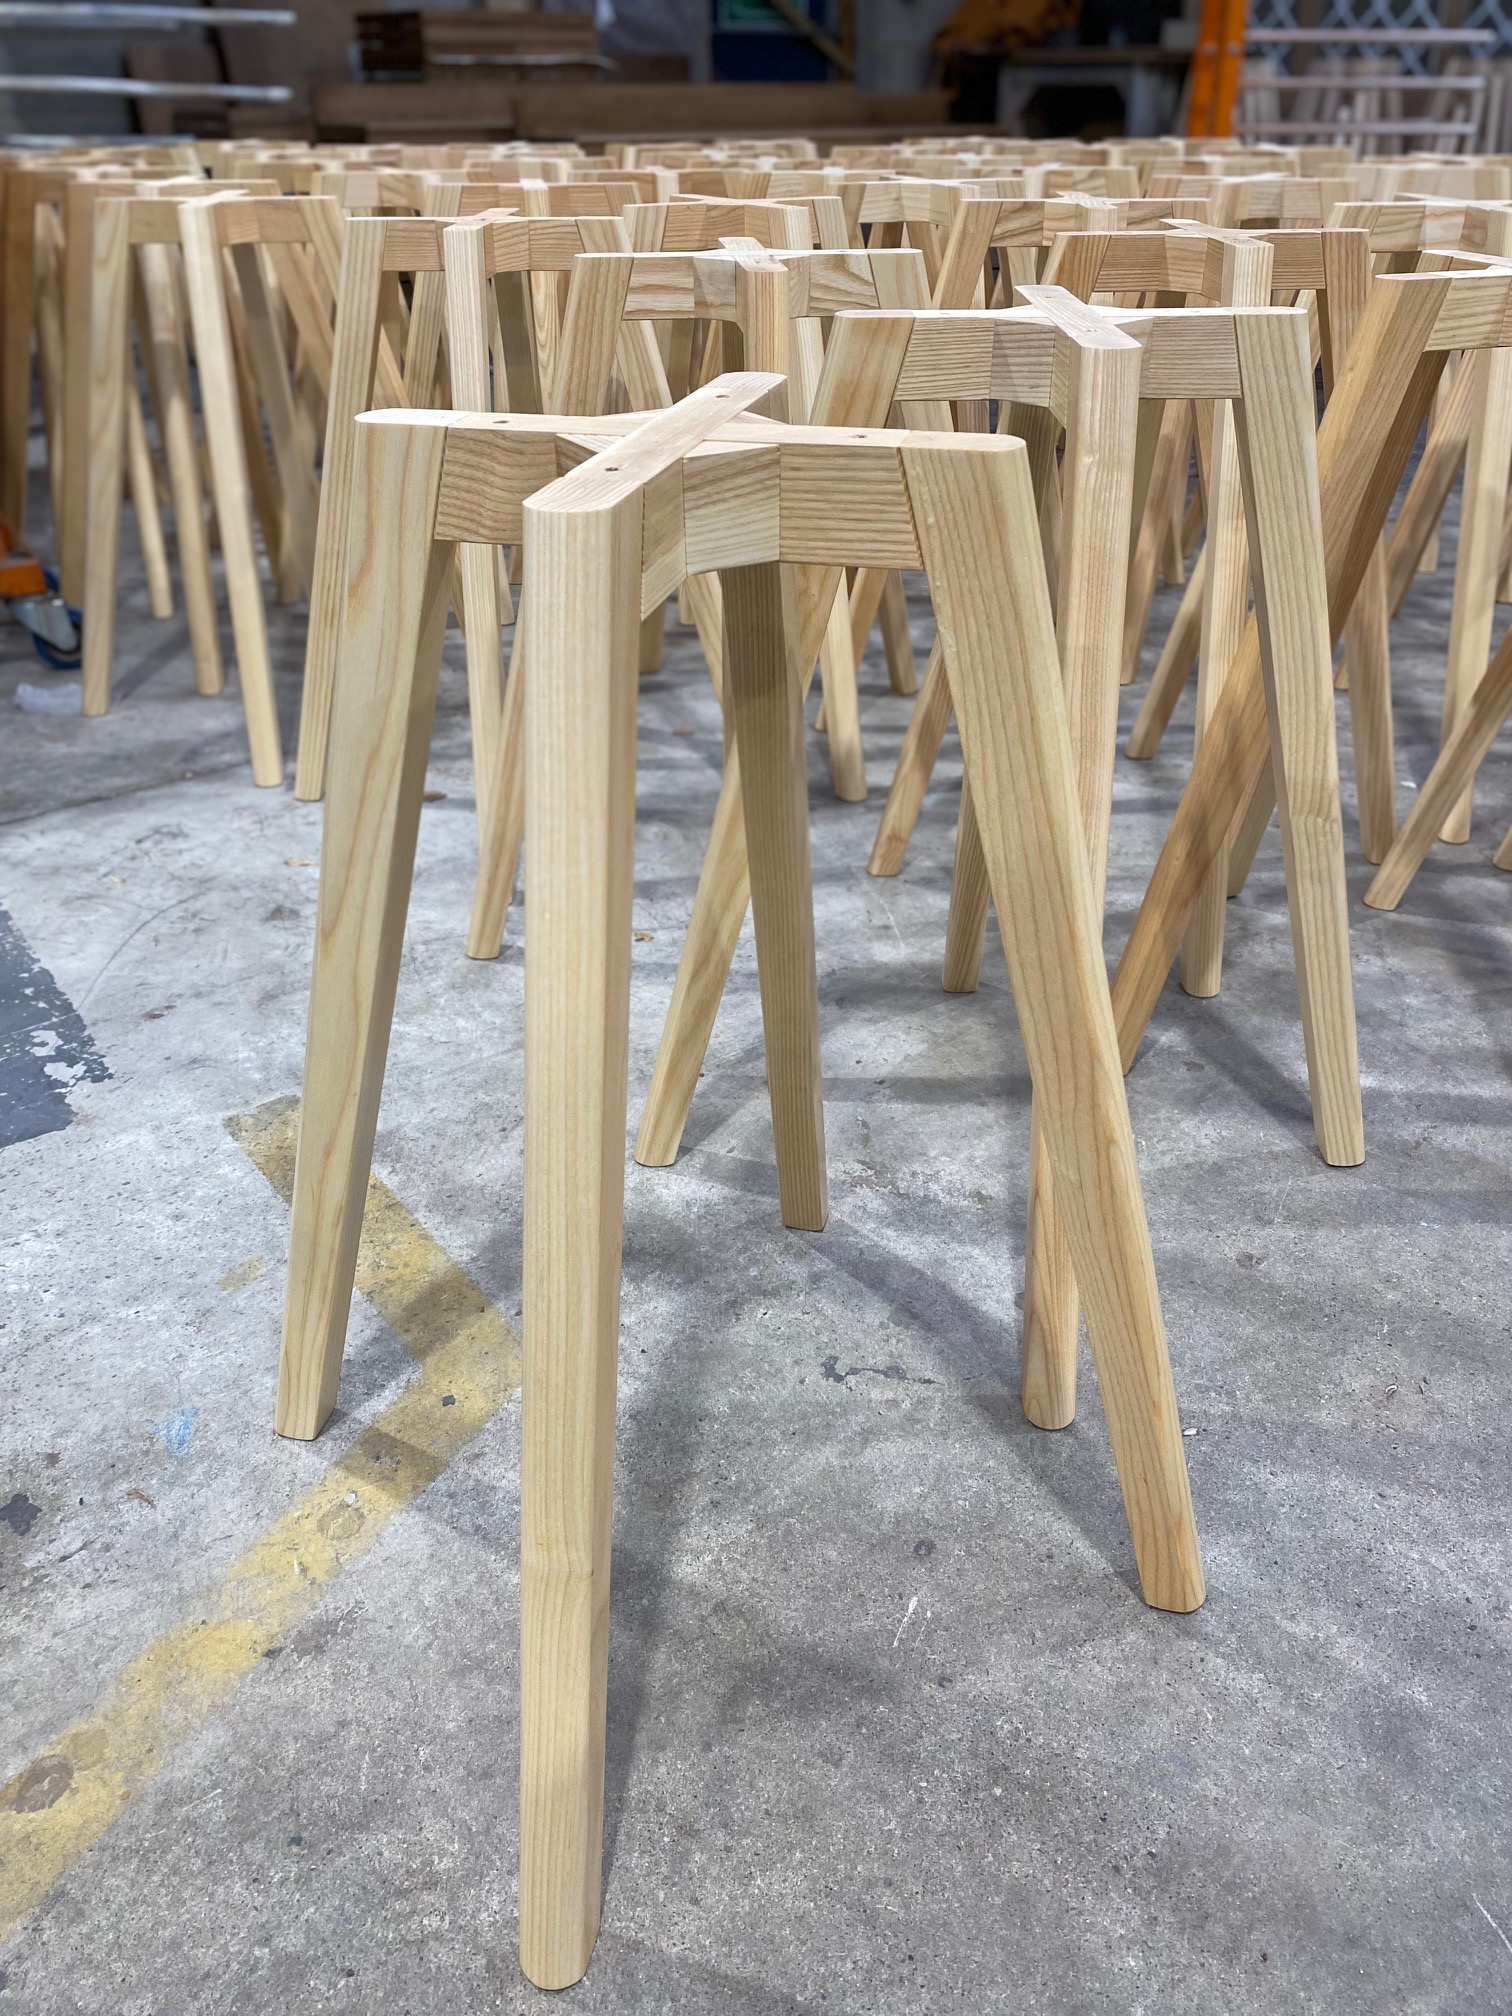 The March of the Stool Frames